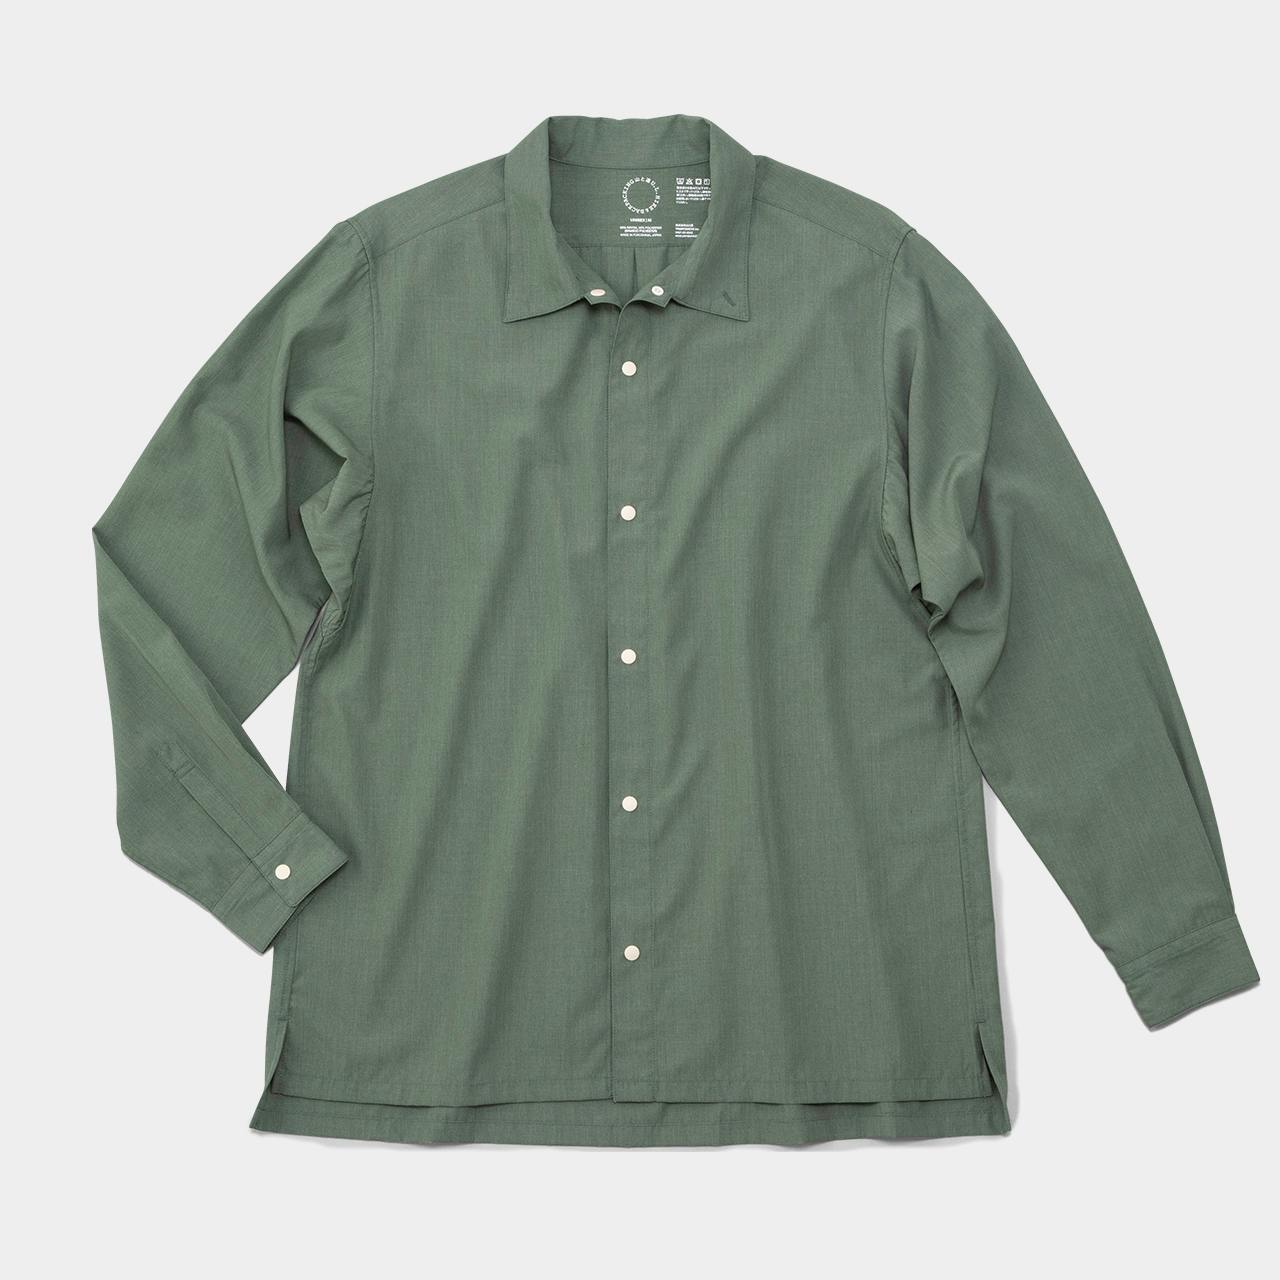 Bamboo Shirt<br>Simple and Tough Trail Shirt<br>For Sale Apr 17, 18:00 JST